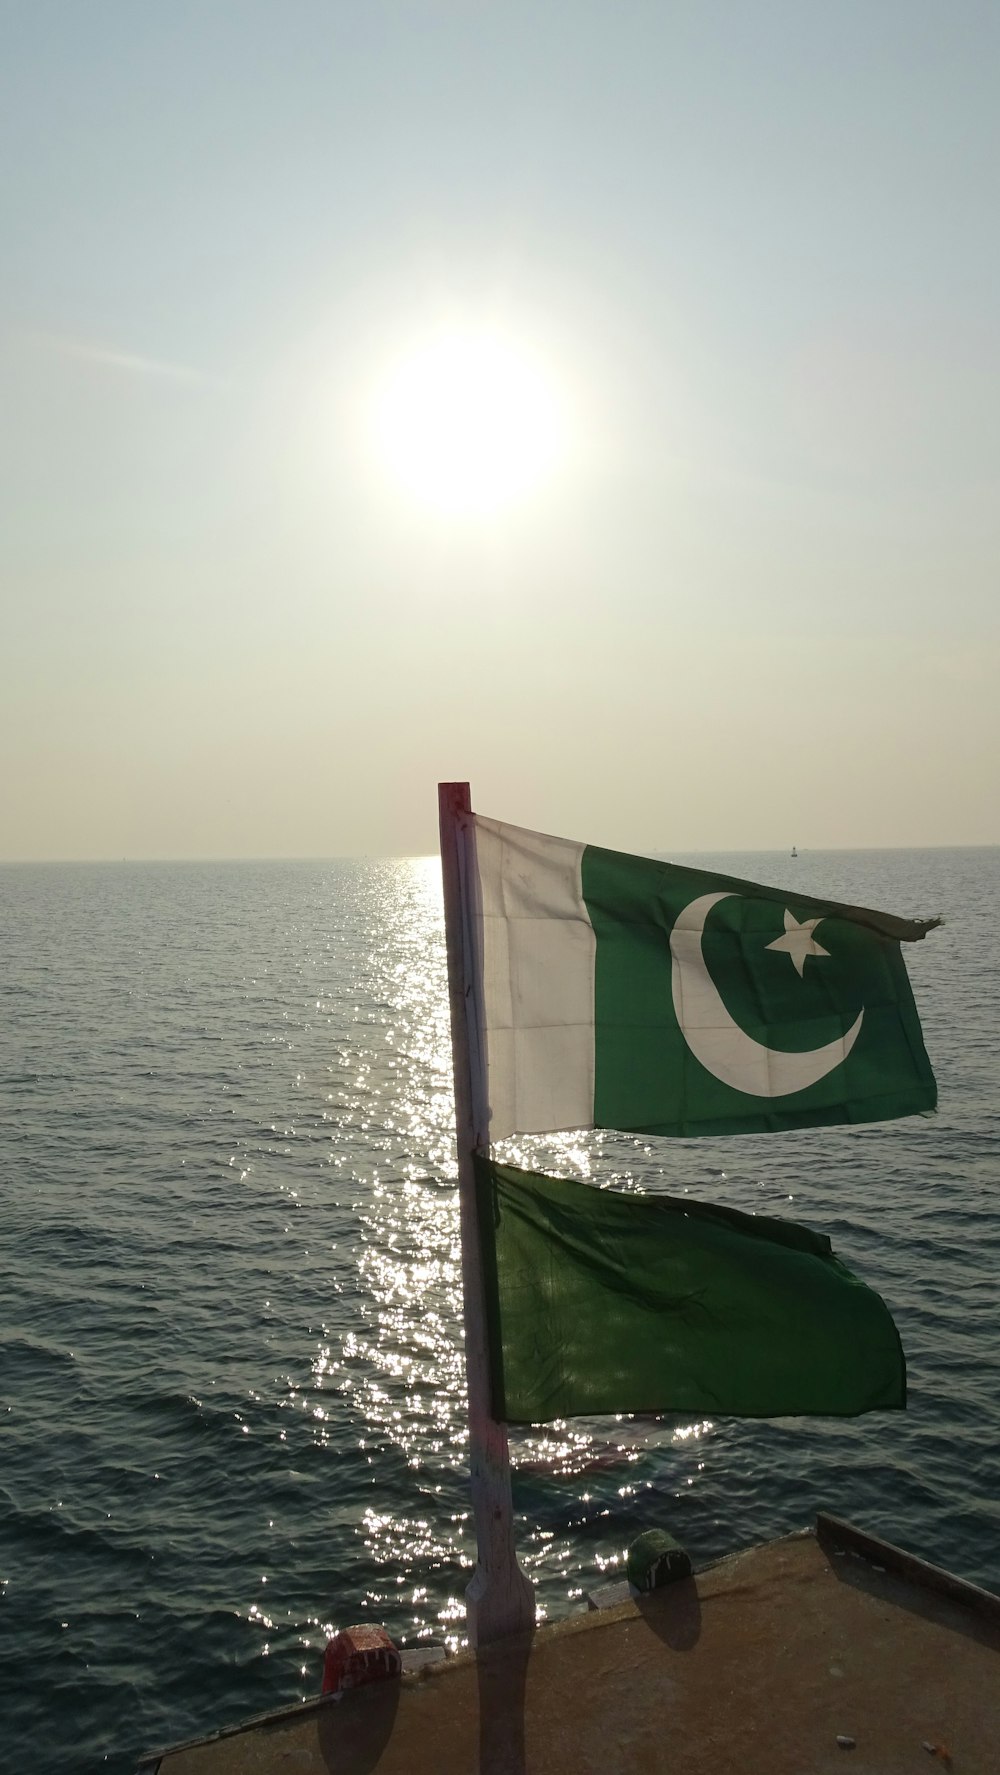 the flag of pakistan and pakistan on a boat in the ocean